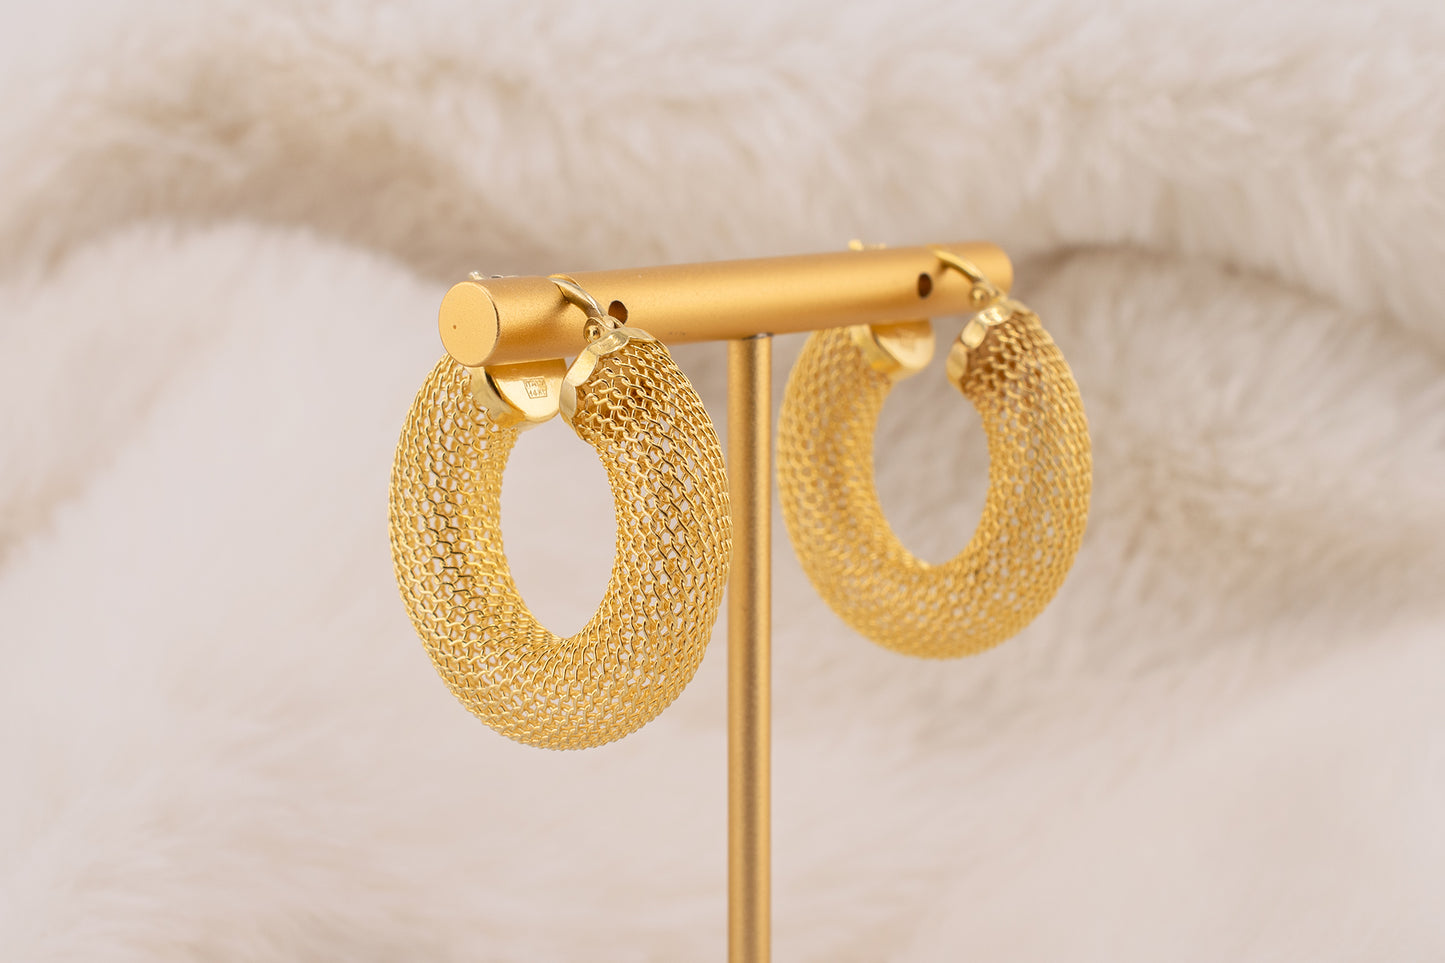 Circa Early 2000s Vintage 14 Karat Yellow Gold Thick Mesh Contemporary Style Hoop Earrings 7.1mm Wide